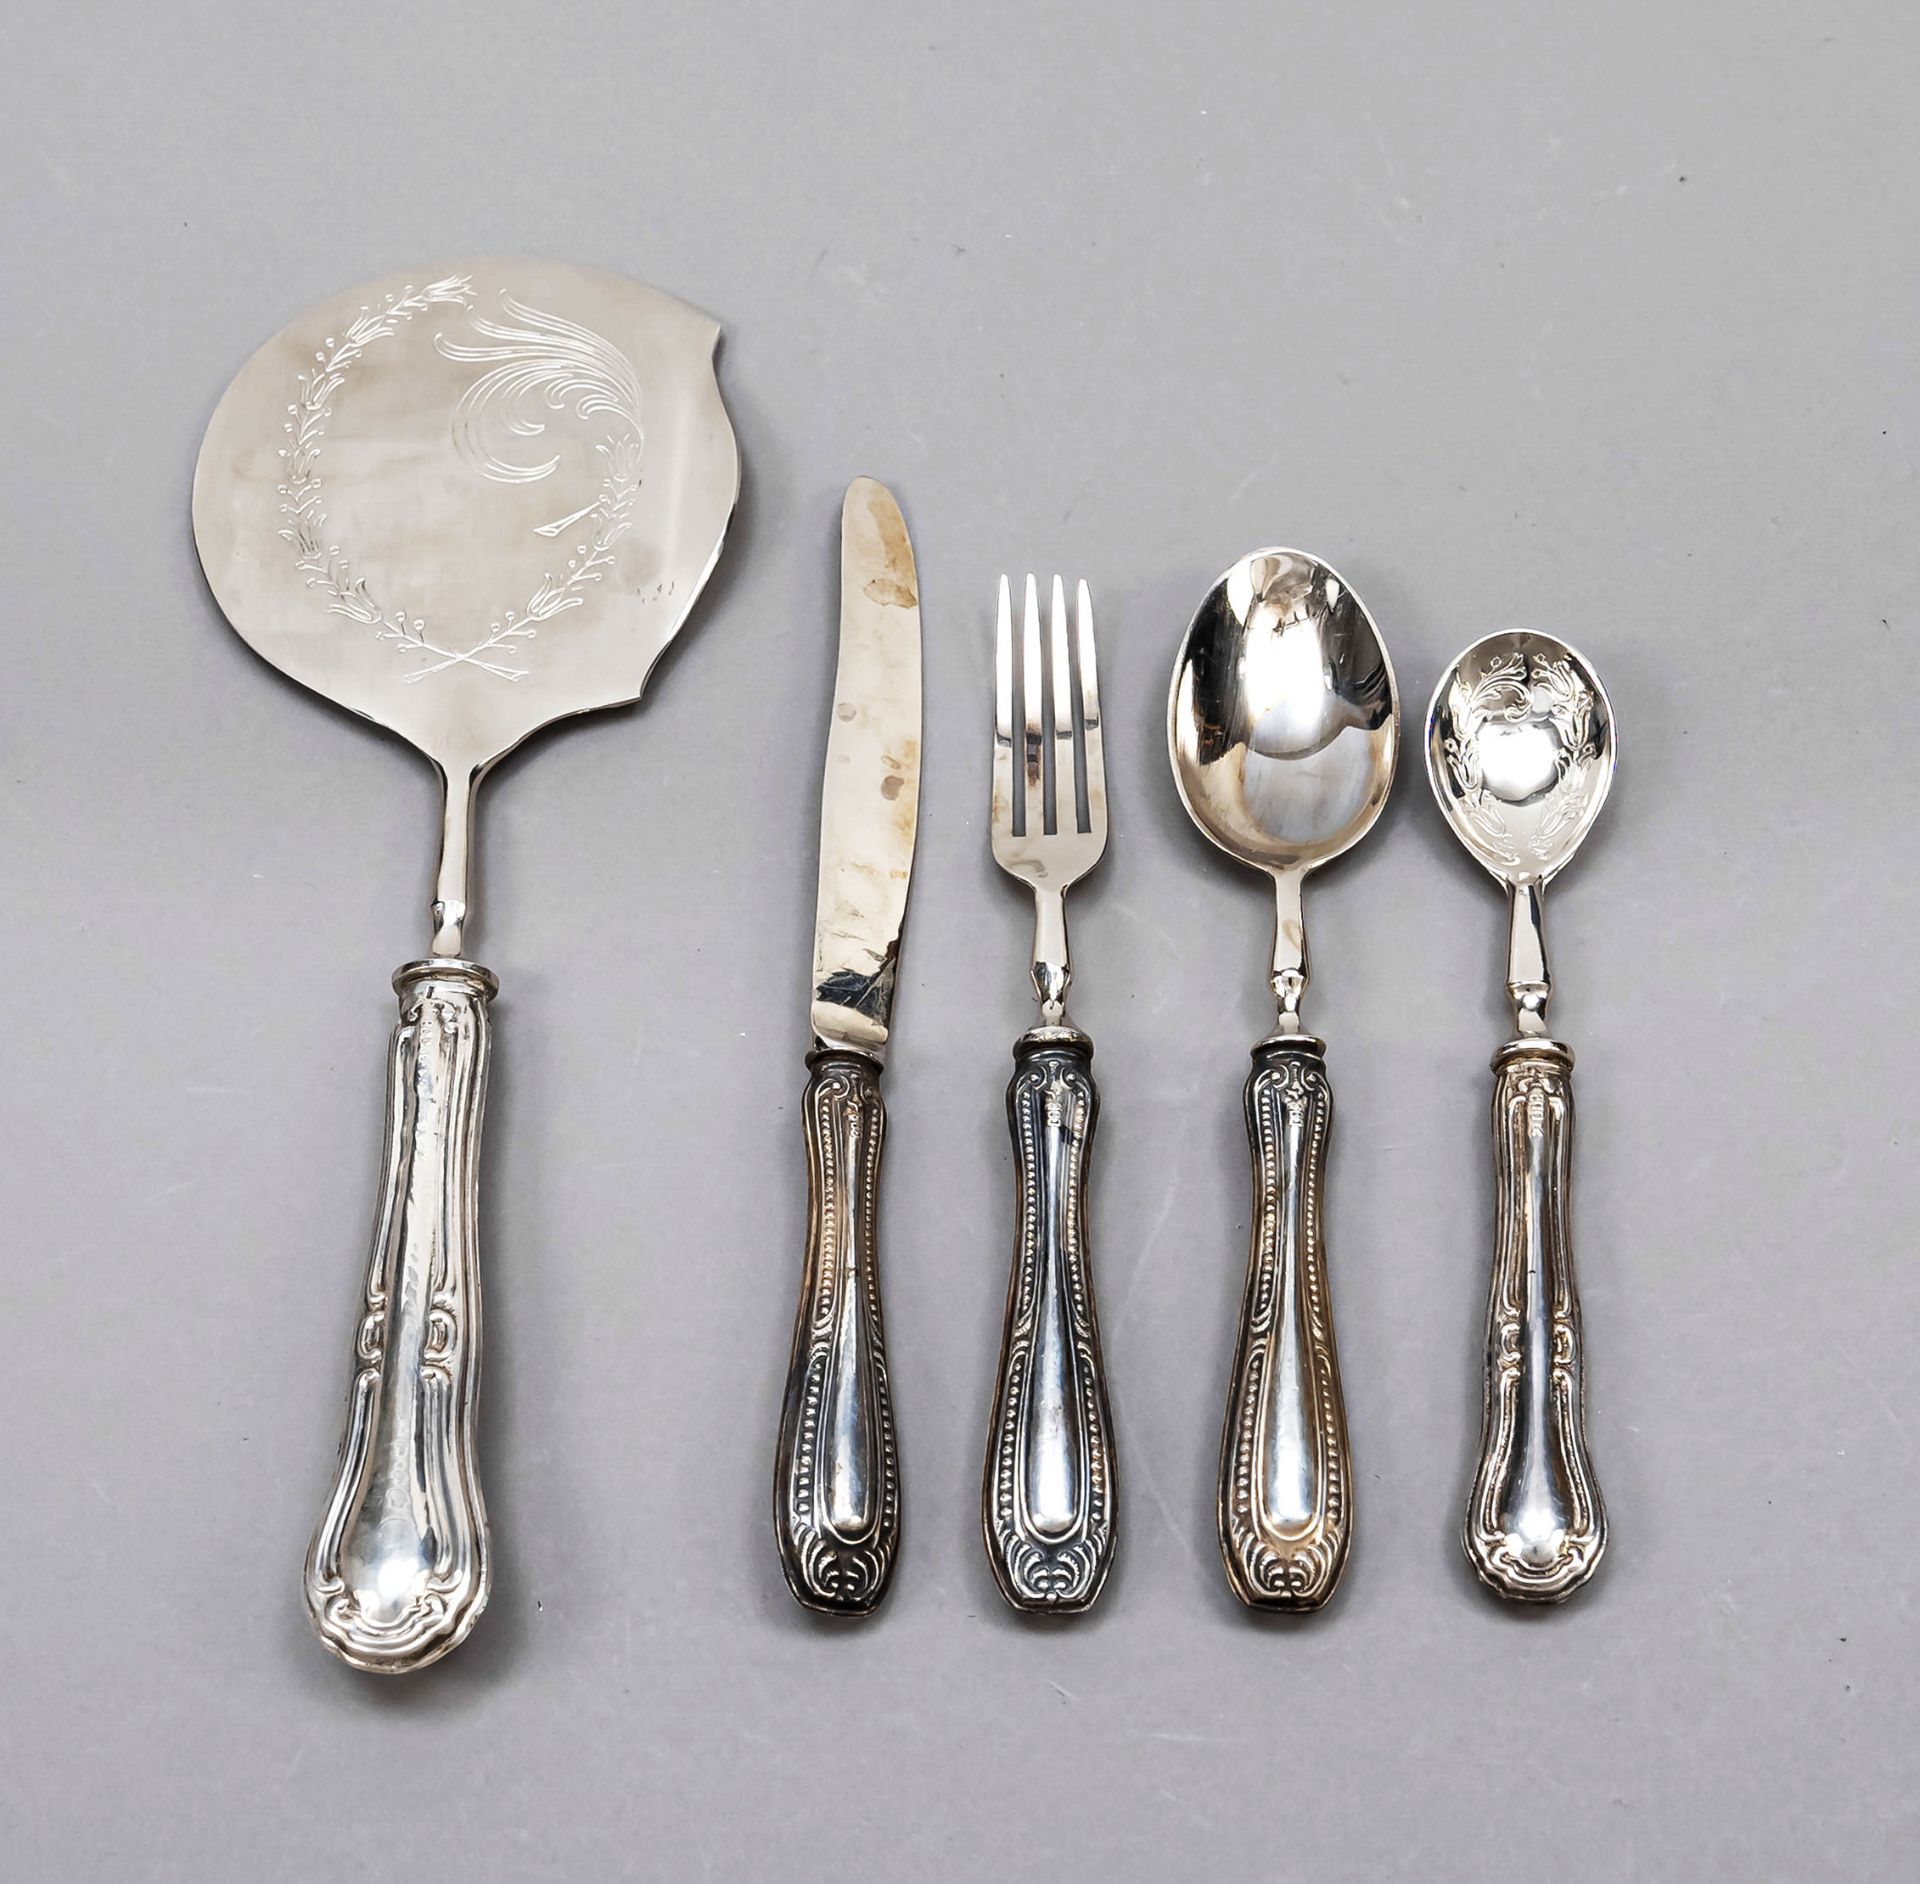 22 pieces of cutlery, 20th c., silver 800/000, 3 different decorations, each filled handles with